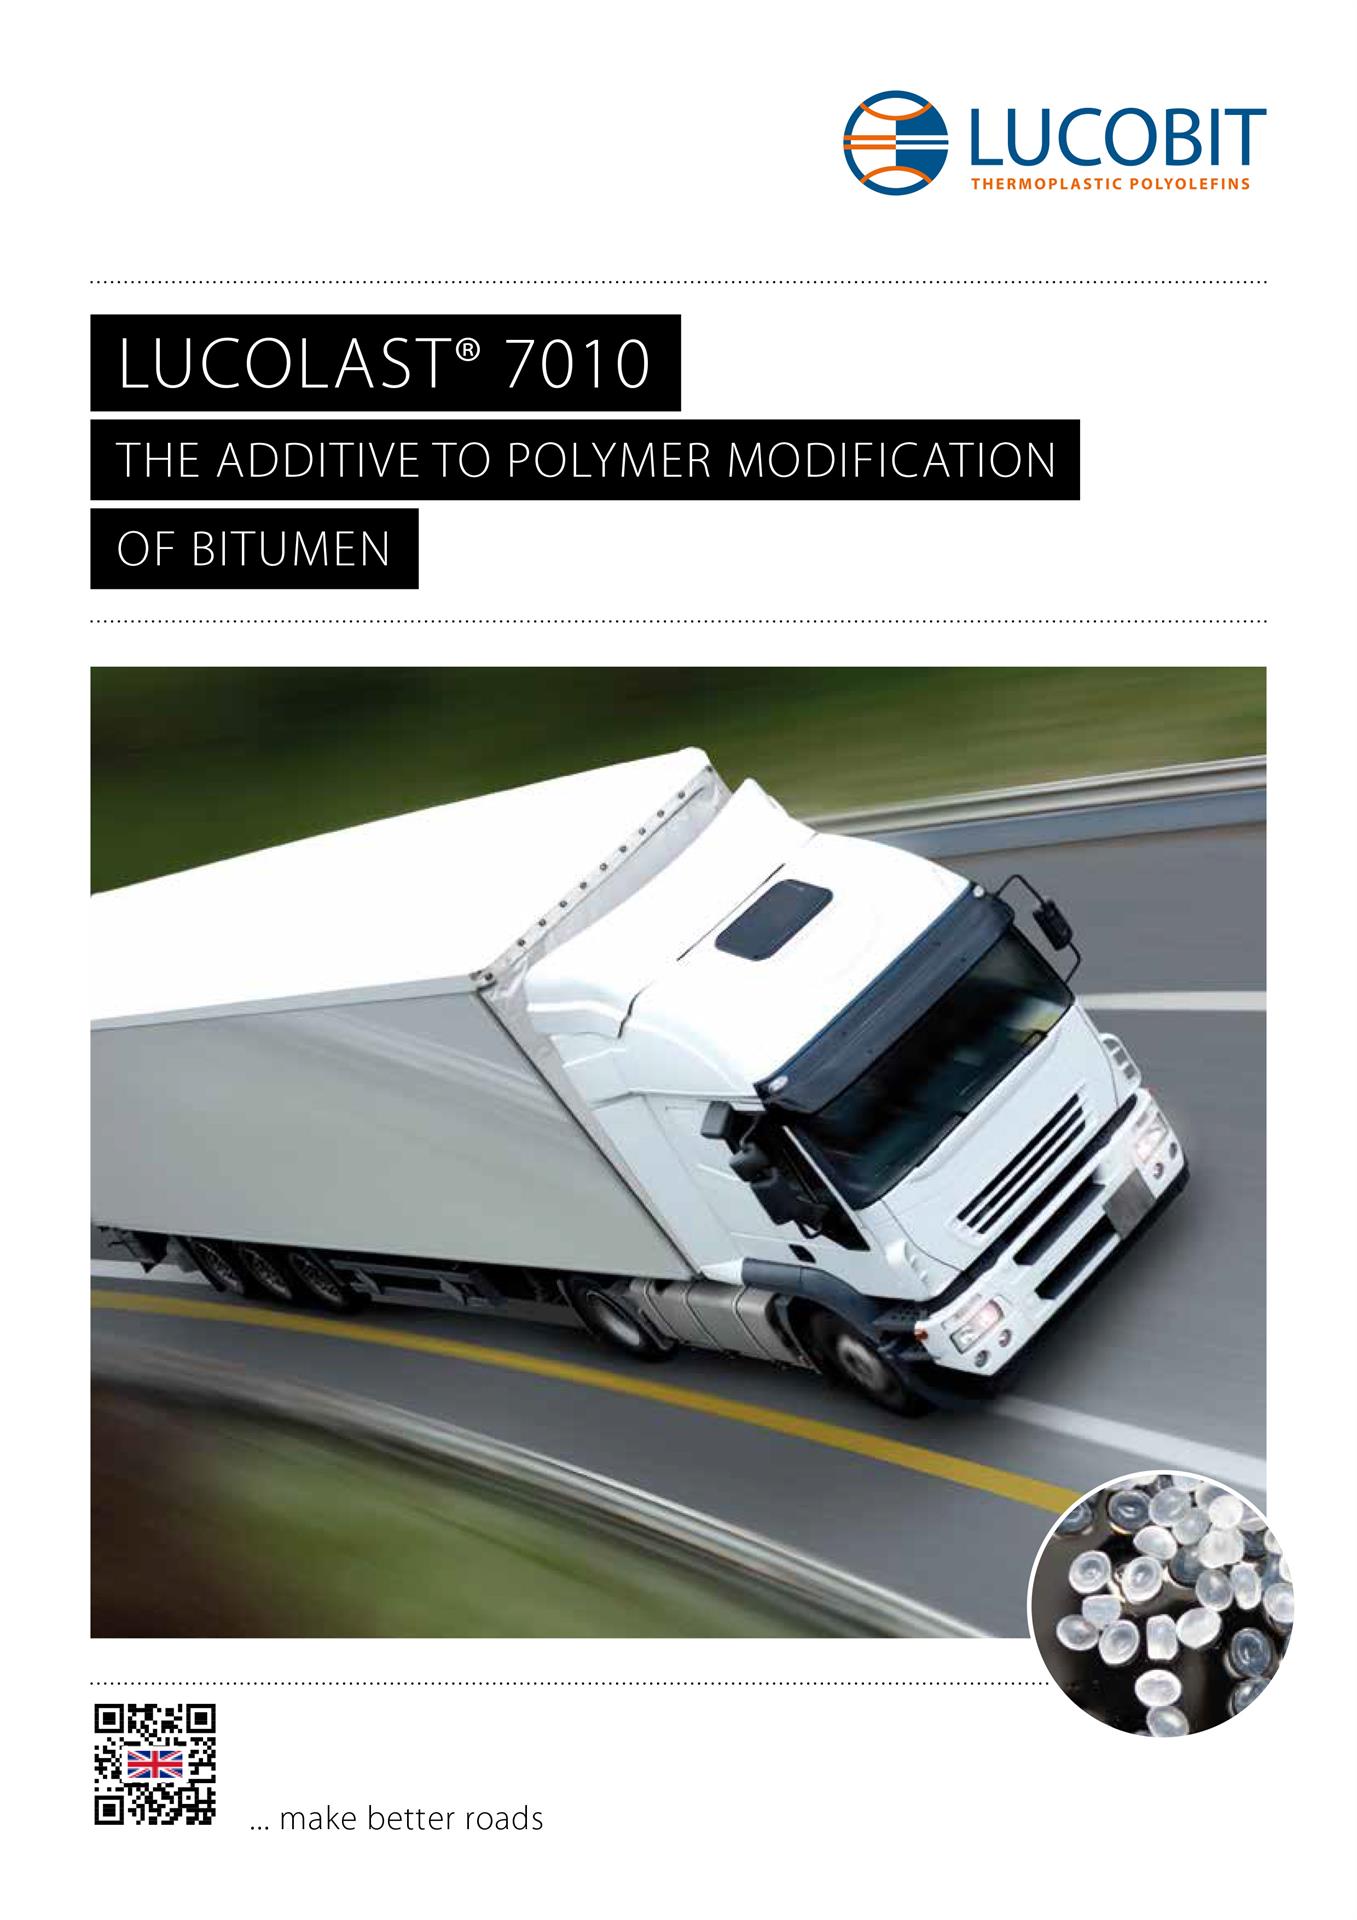 LUCOBIT Broschüre - LUCOLAST 7010 THE ADDITIVE TO POLYMER MODIFICATION OF BITUMEN